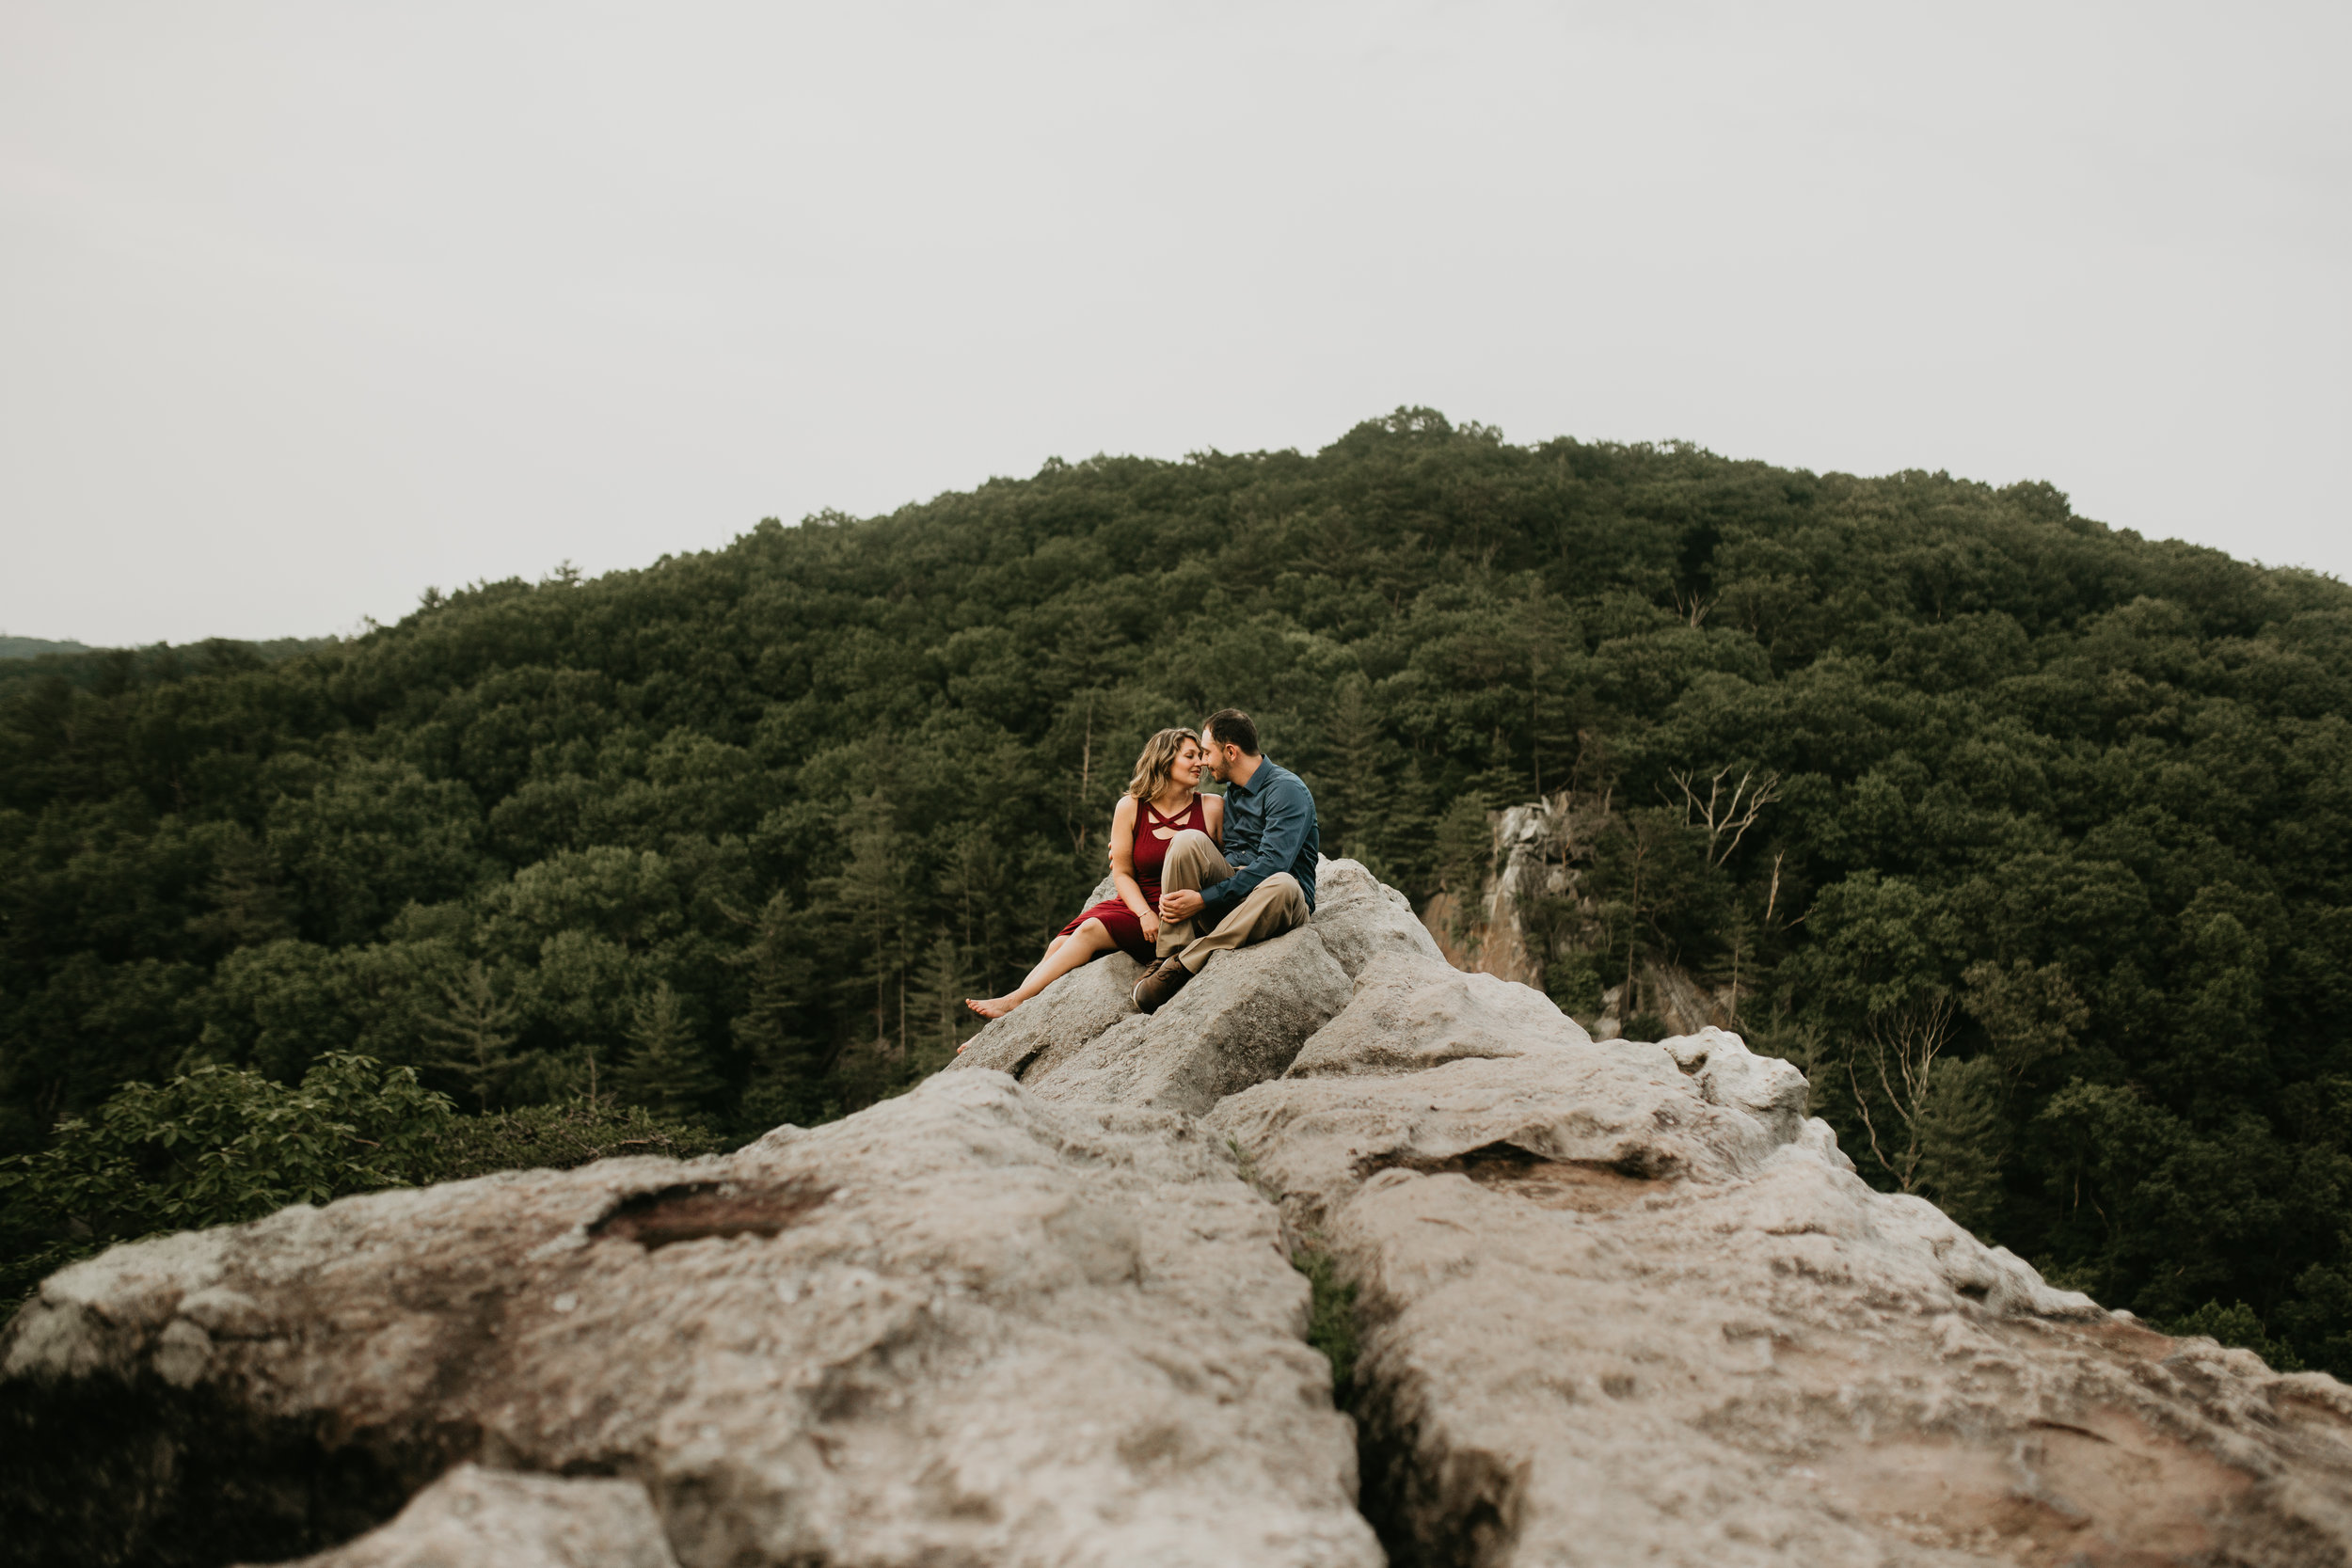 Nicole-Daacke-Photography-rock-state-park-overlook-king-queen-seat-maryland-hiking-adventure-engagement-session-photos-portraits-summer-bel-air-dog-engagement-session-33.jpg